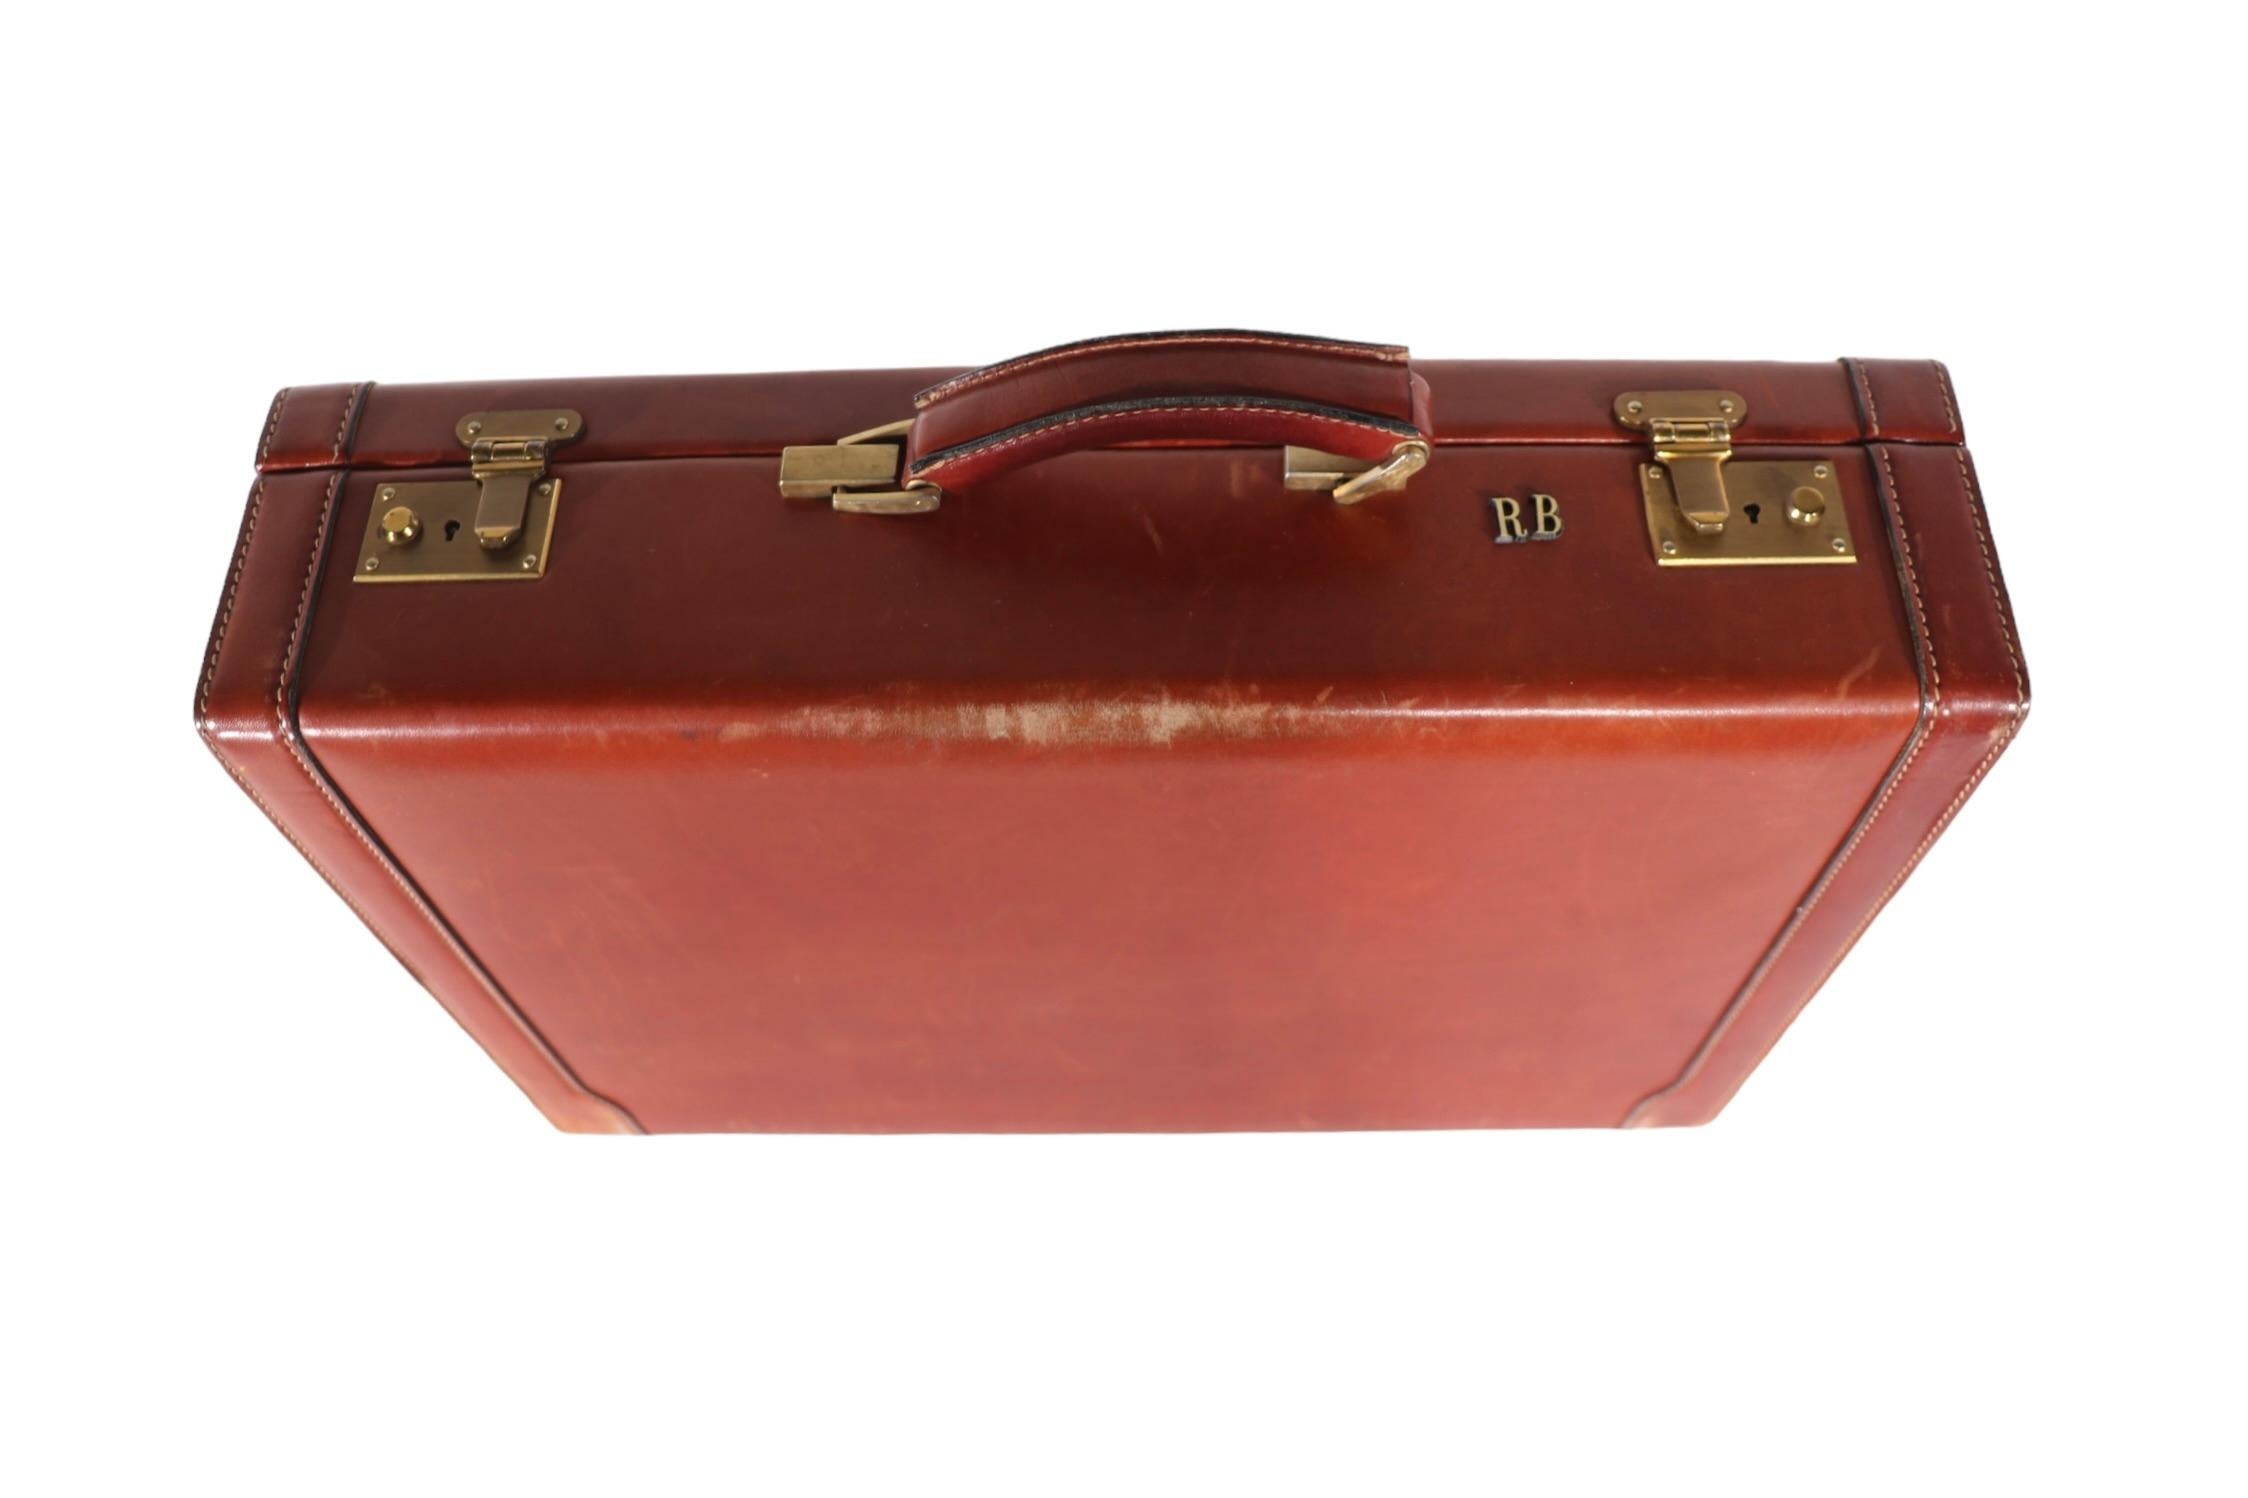  Mid Century Art Deco Hard Case Leather Attache Briefcase  after Bally, Hermes  For Sale 6